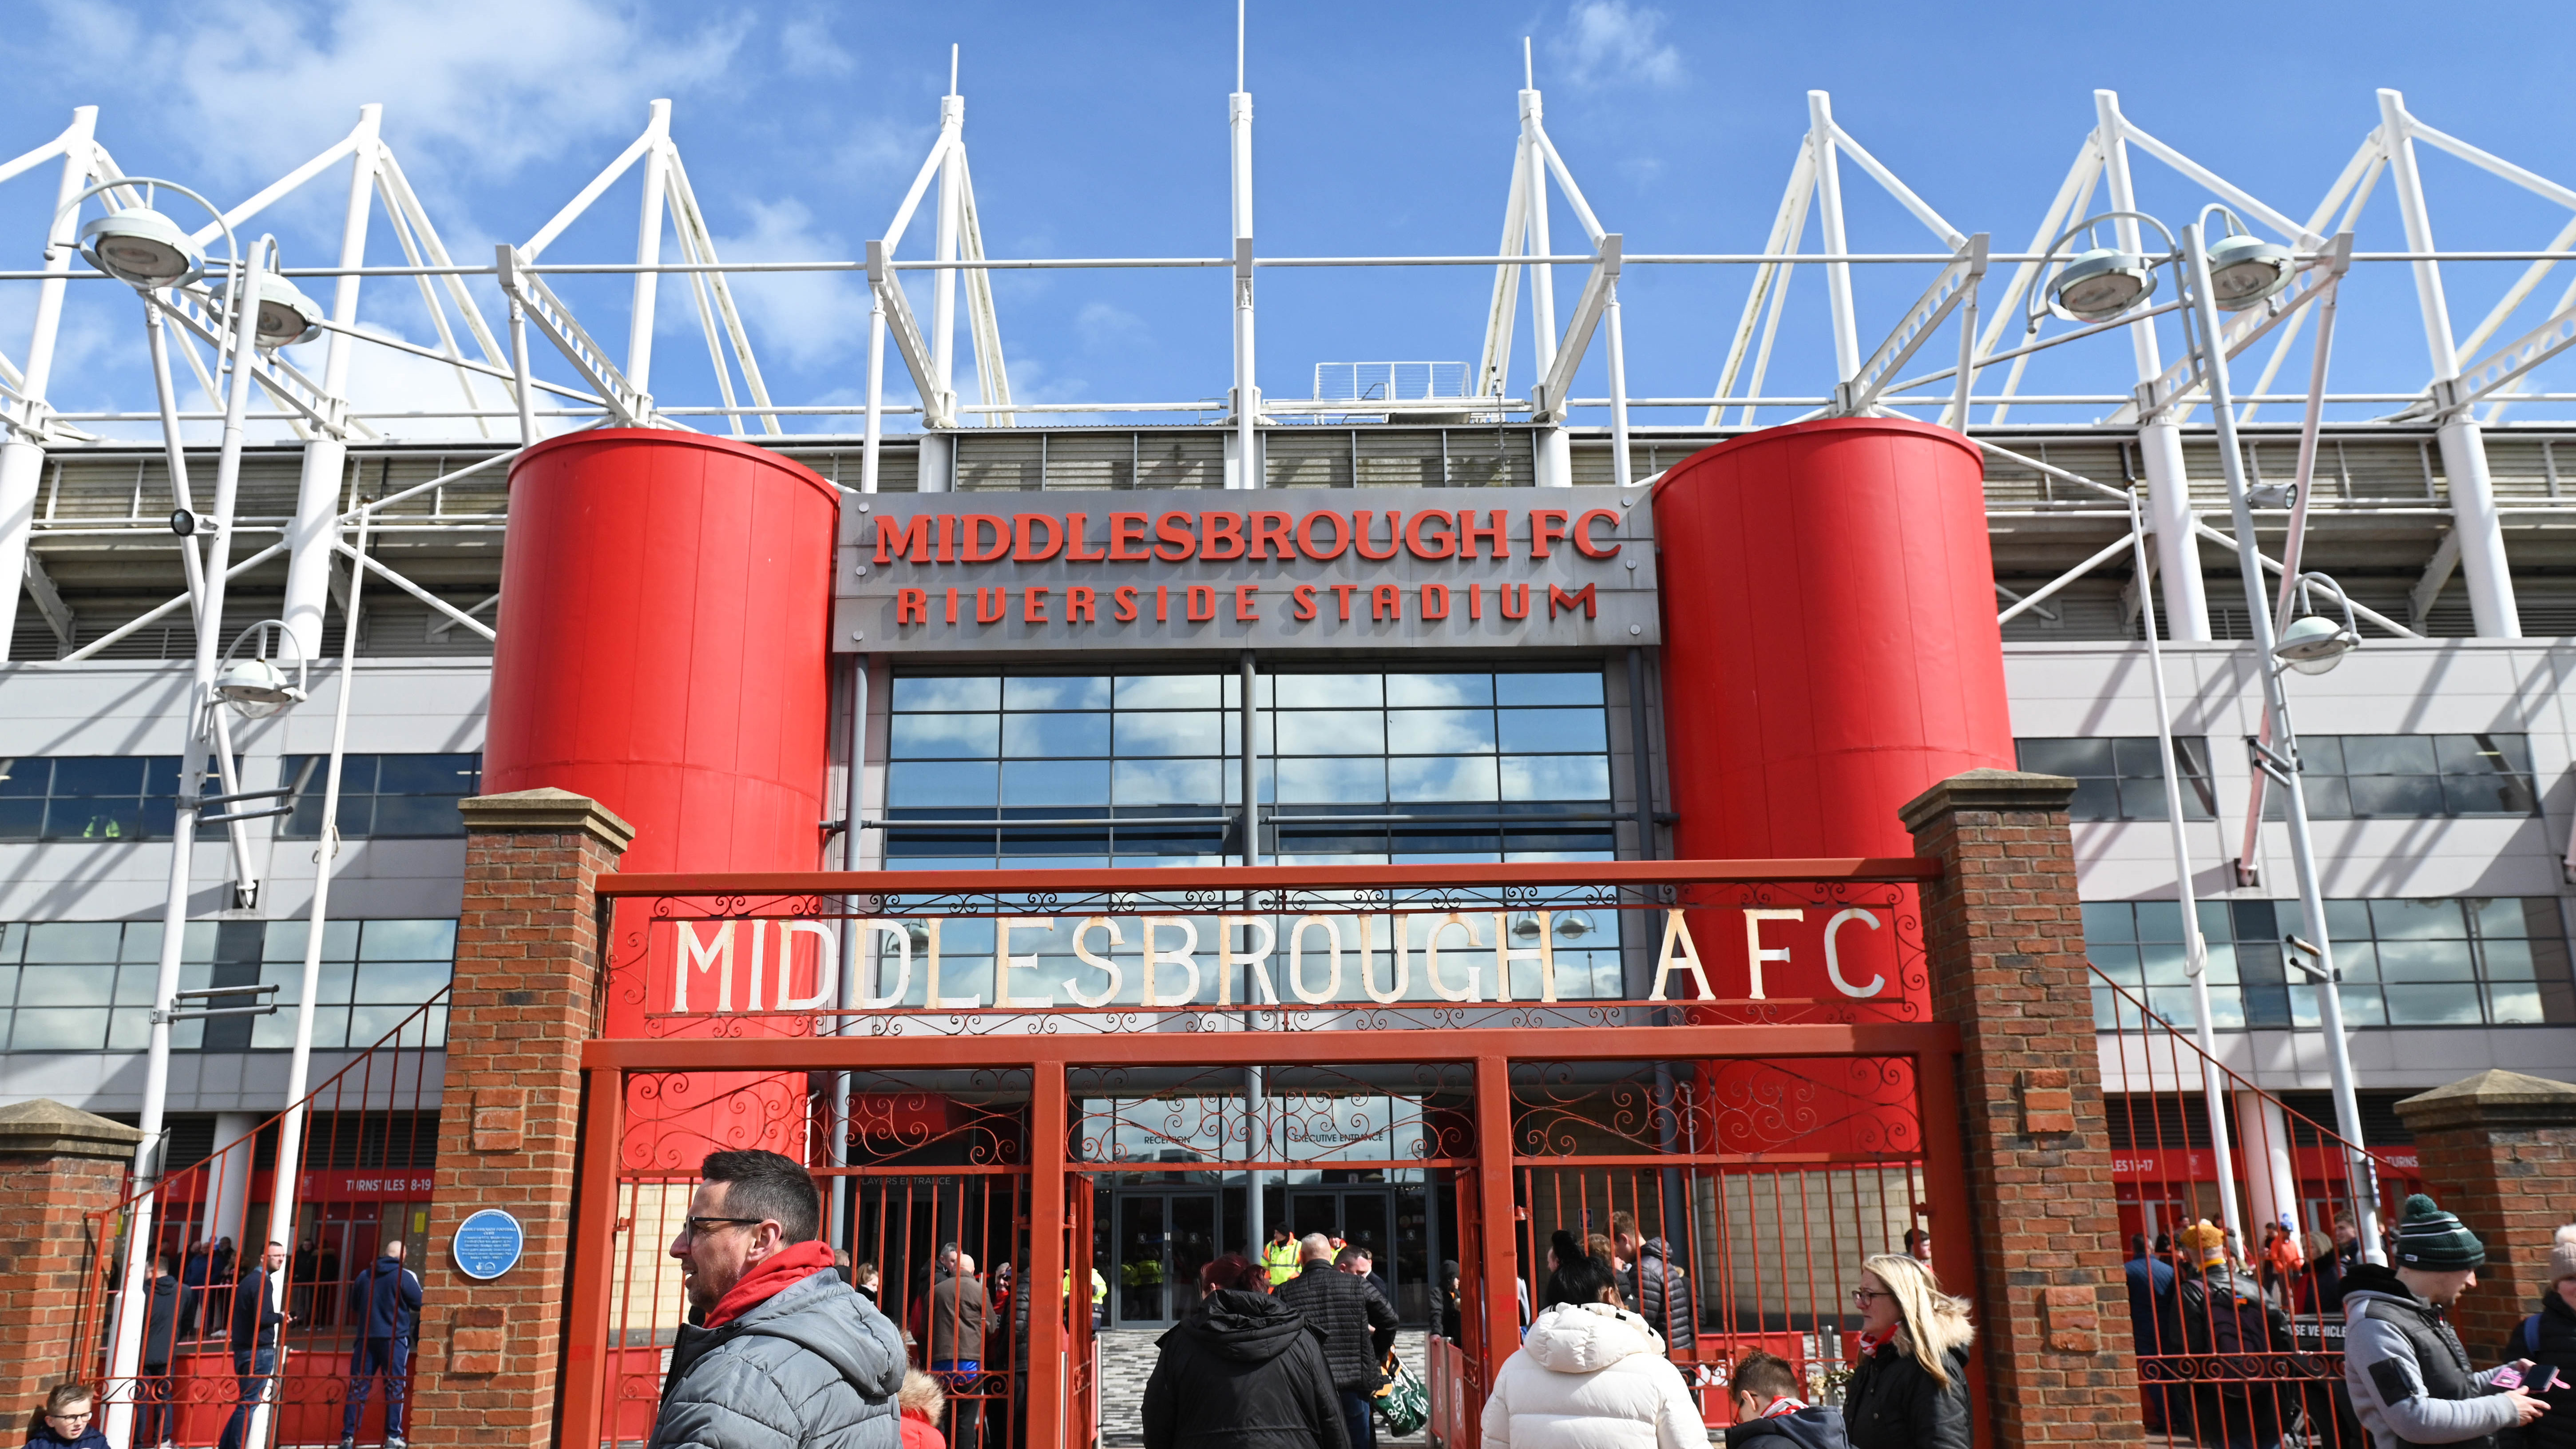 The front of Middlesbrough's stadium 